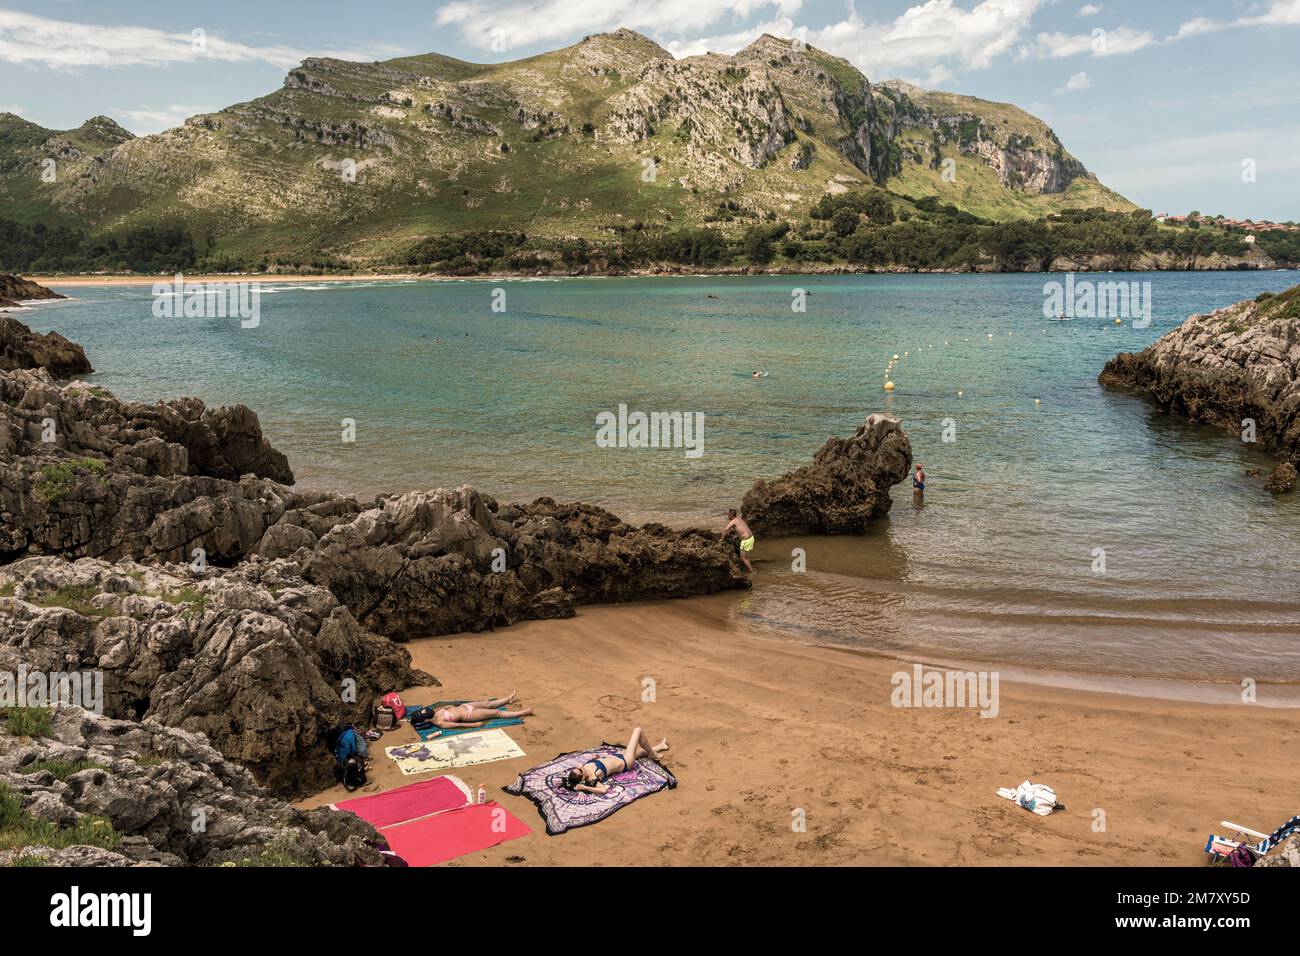 two women lying on the towel in bikinis on the sand of the small beach of the town of Islares, while other people bathe, Cantabria, Spain Stock Photo